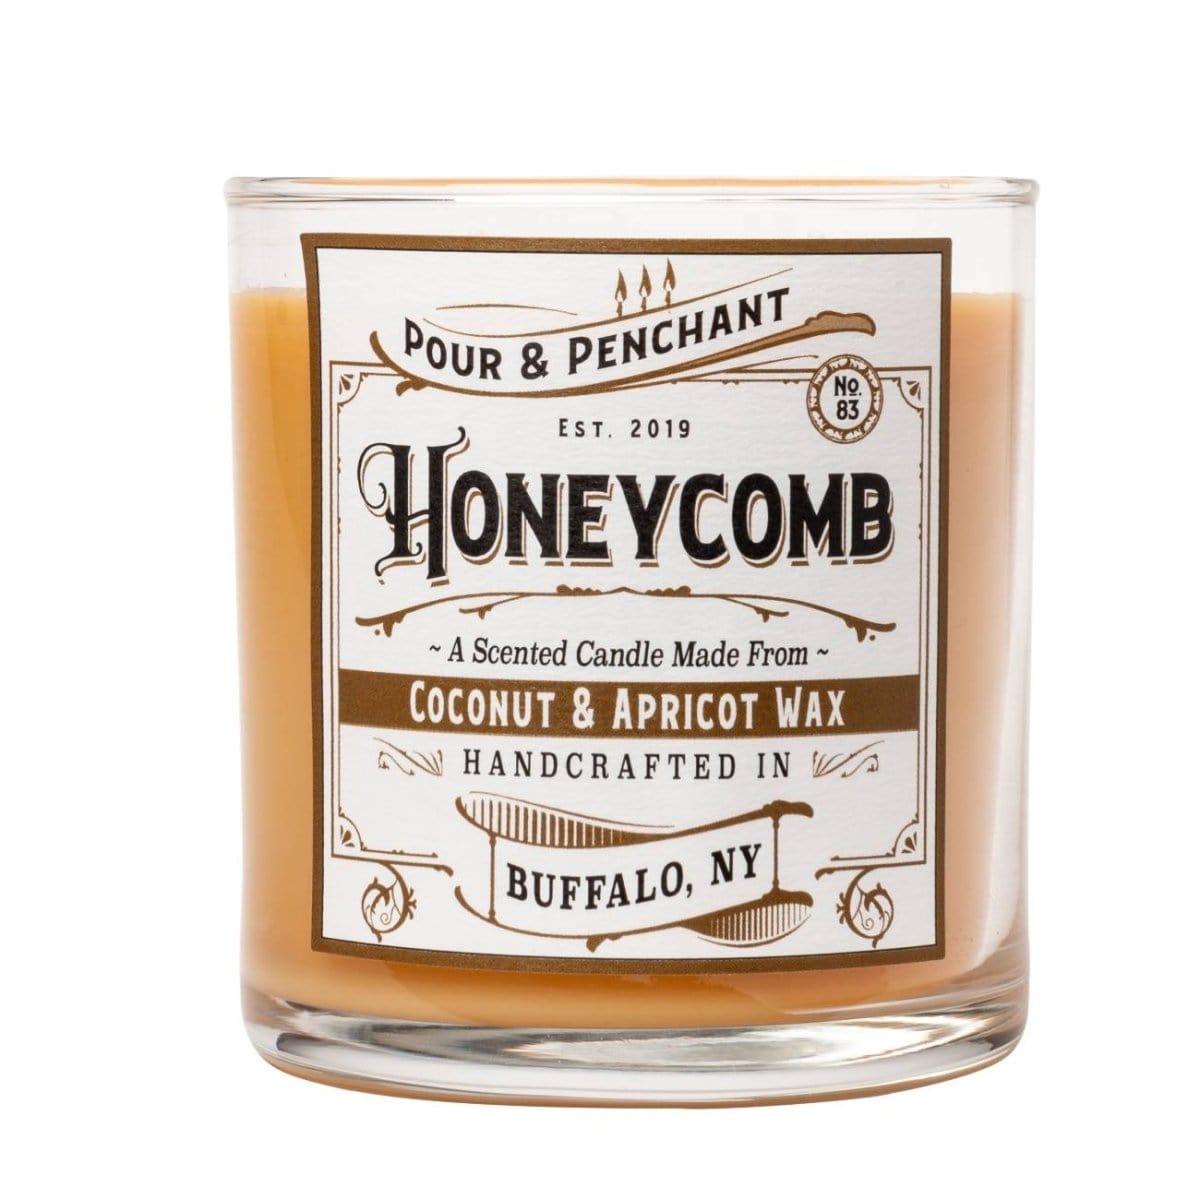 Pour & Penchant 10 oz Scented Candle - HONEYCOMB no.83 - Spiced Honey, Tonka & Tobacco Leaves